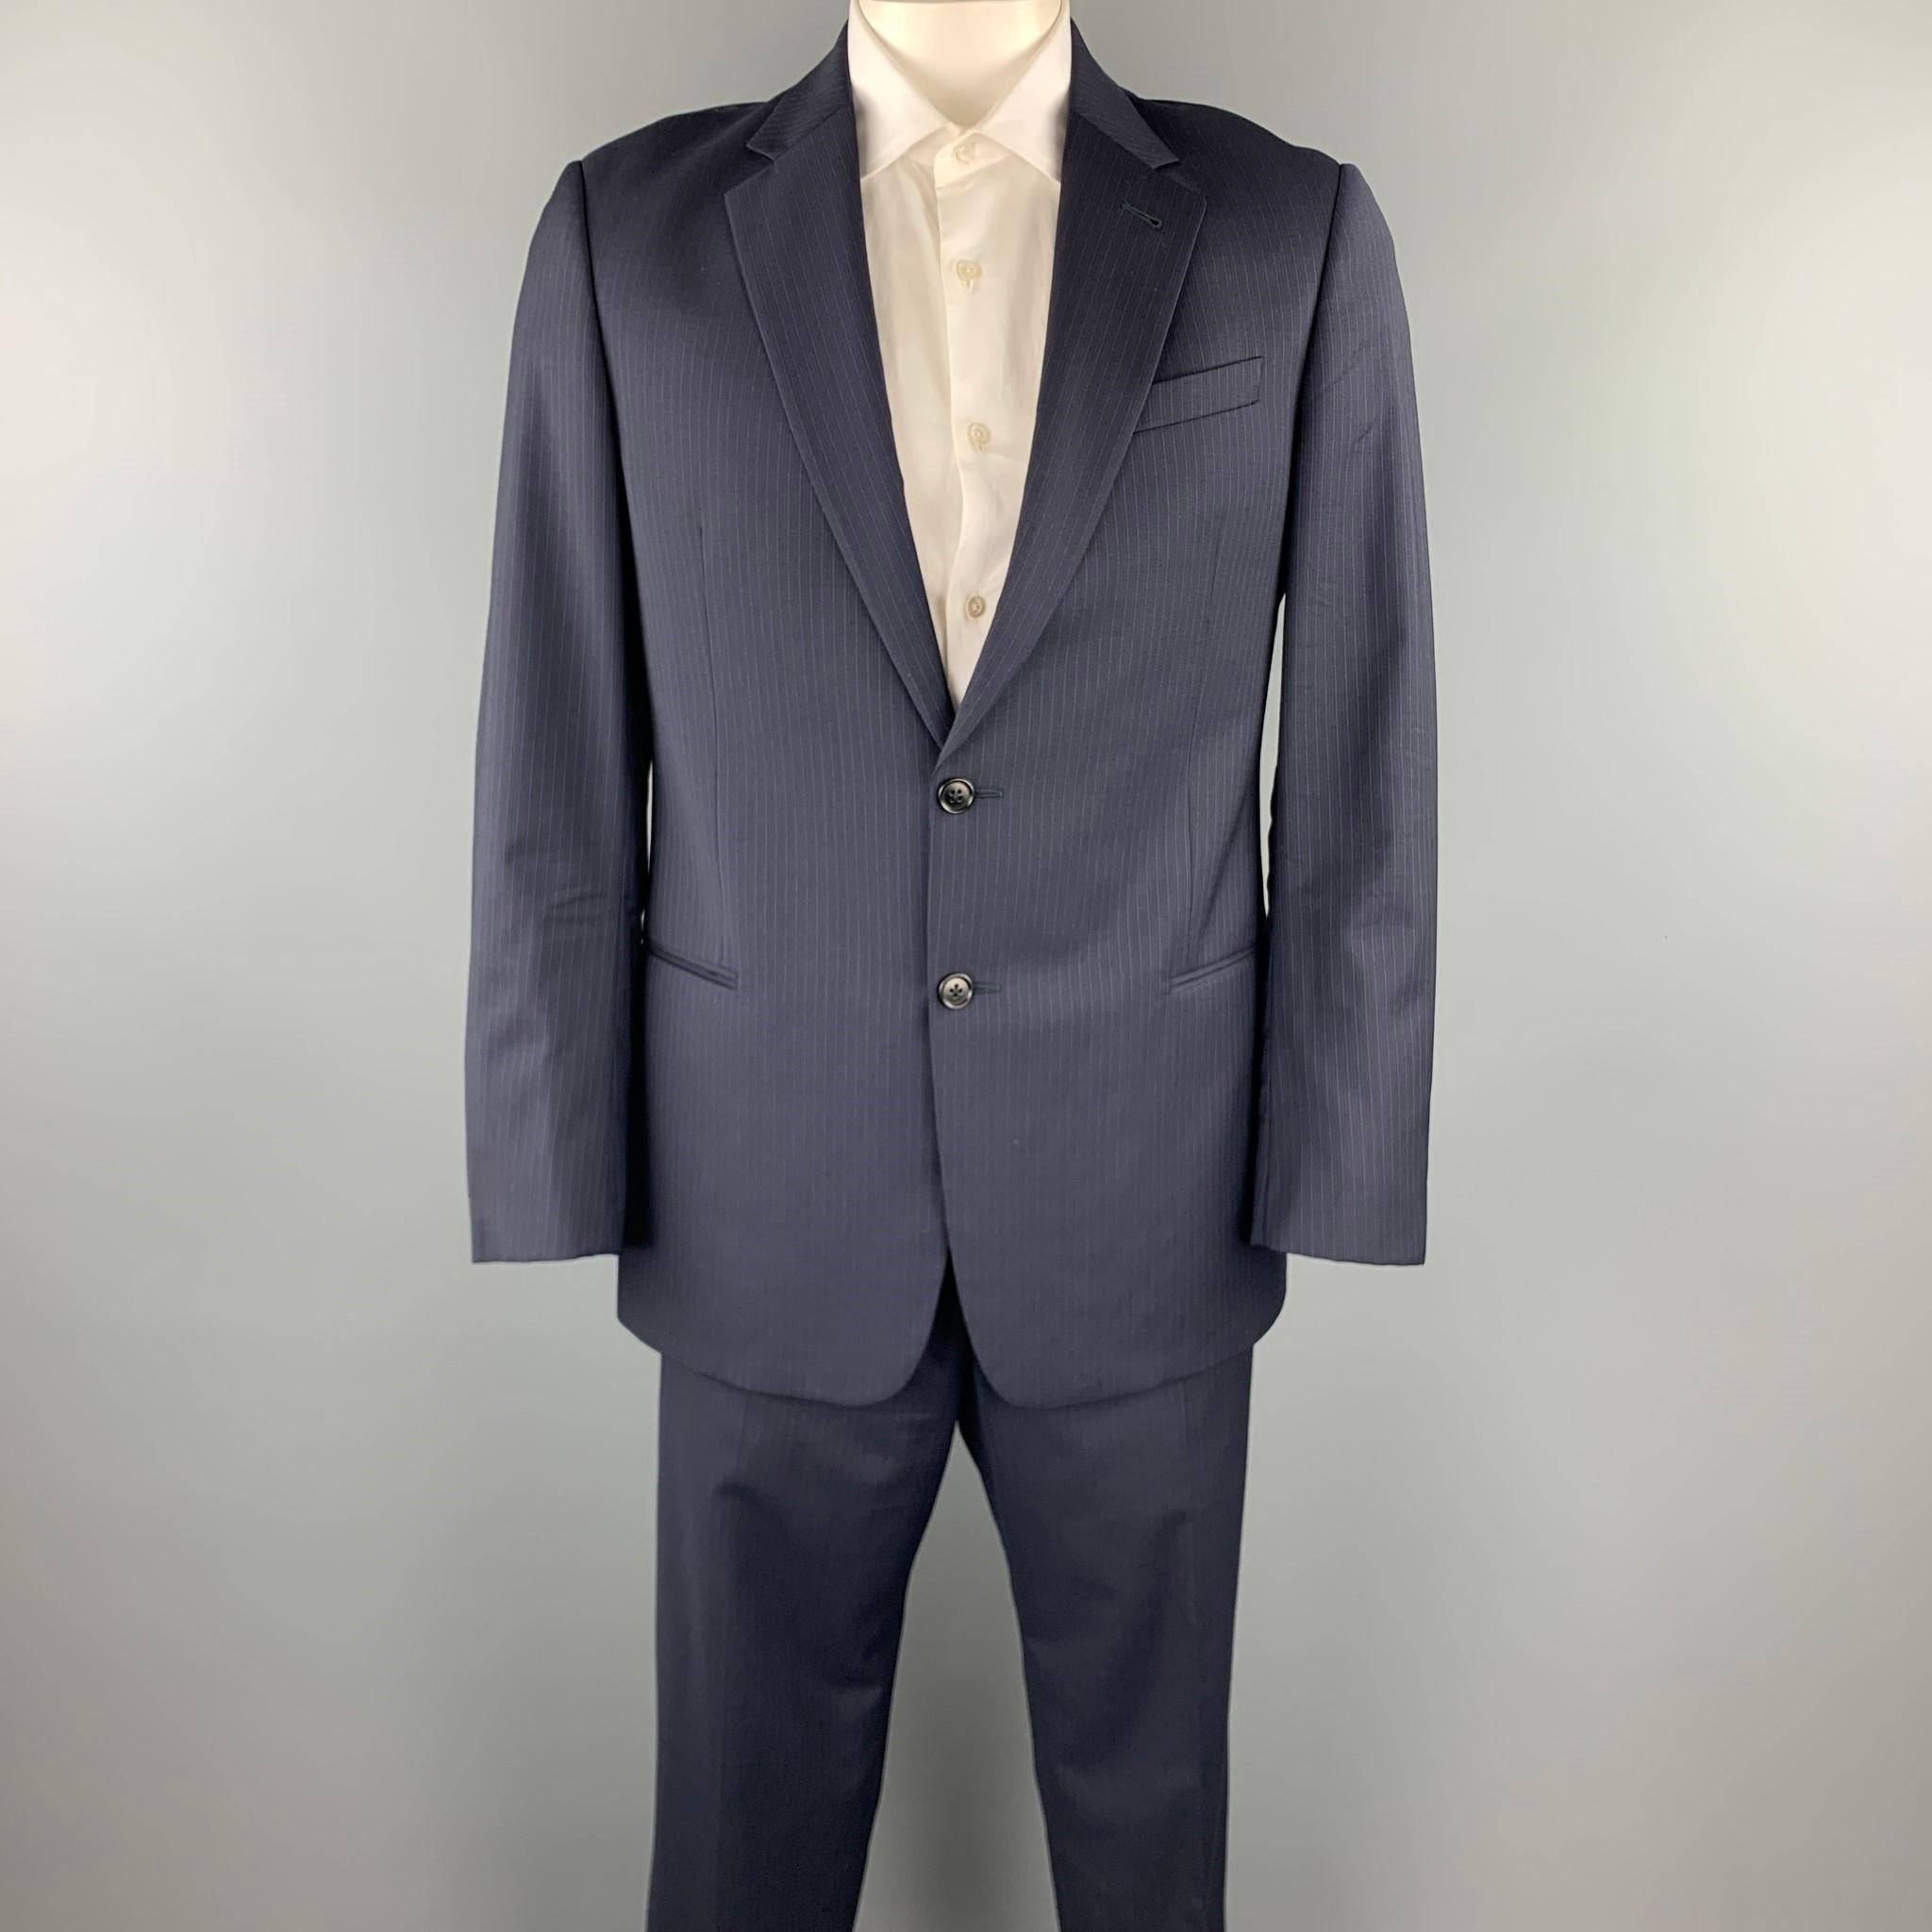 ARMANI COLLEZIONI suit comes in a navy pinstripe wool and includes a single breasted, two button sport coat with a notch lapel and matching flat front trousers. Made in Italy.

Excellent Pre-Owned Condition.
Marked: 42